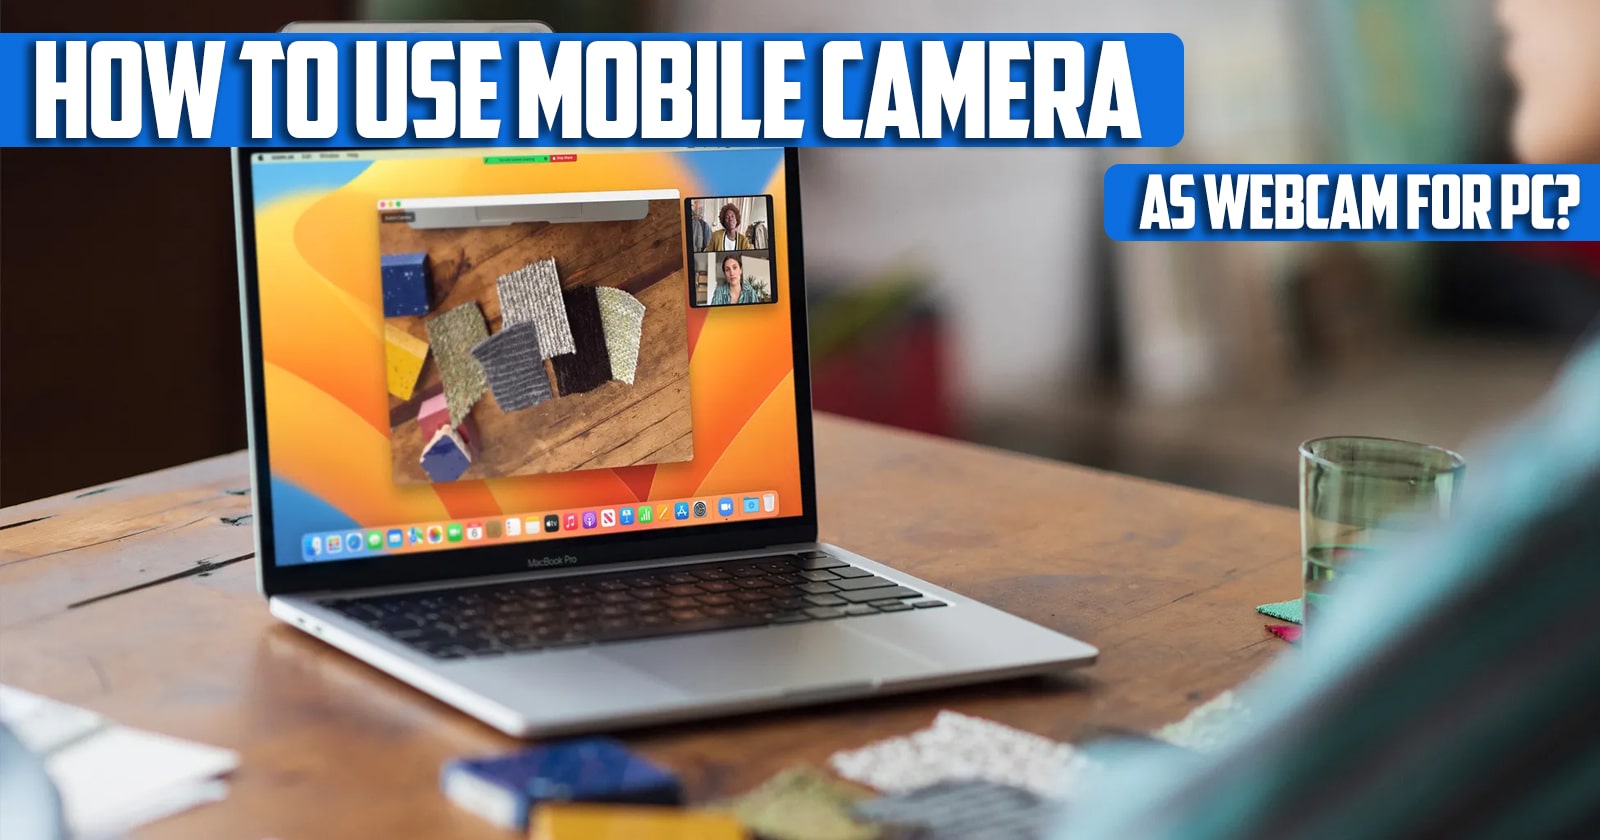 How to use mobile camera as webcam for PC?